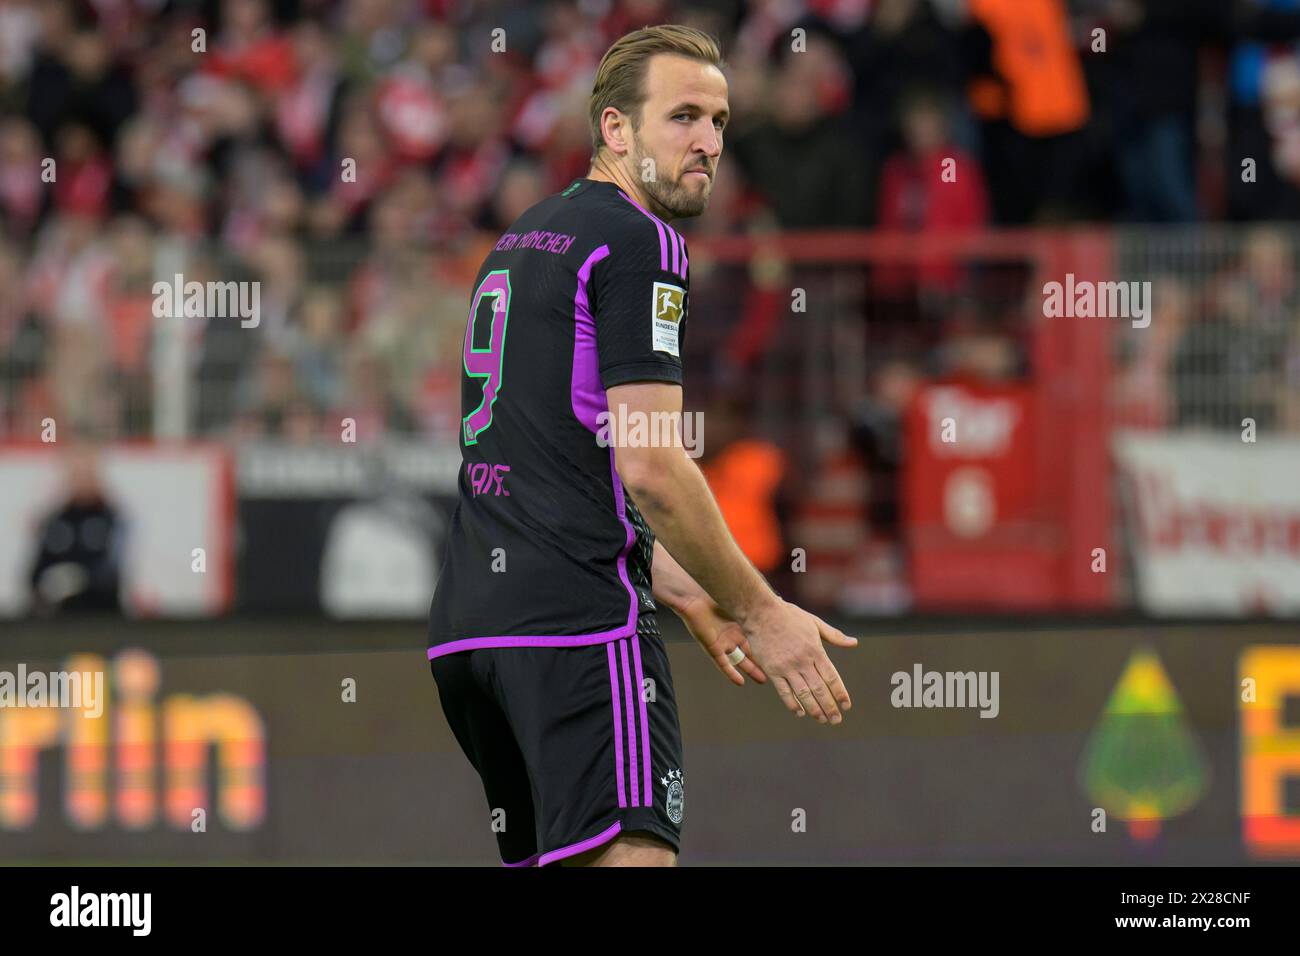 Berlin, Germany. 20th Apr, 2024. Harry Kane (FC Bayern Muenchen, #09), comes, goes, angry, points, shows,  1. FC Union Berlin vs FC Bayern Muenchen, 1st Bundesliga, soccer, DFB, Bundesliga, season 2023/2024, Alte Foersterei, 30th matchday, Credit: HMB Media/Uwe Koch/Alamy Live News  DFB/DFL REGULATIONS PROHIBIT ANY USE OF PHOTOGRAPHS AS IMAGE SEQUENCES AND/OR QUASI-VIDEO,  20.04.2024, Credit: Heiko Becker/Alamy Live News Stock Photo